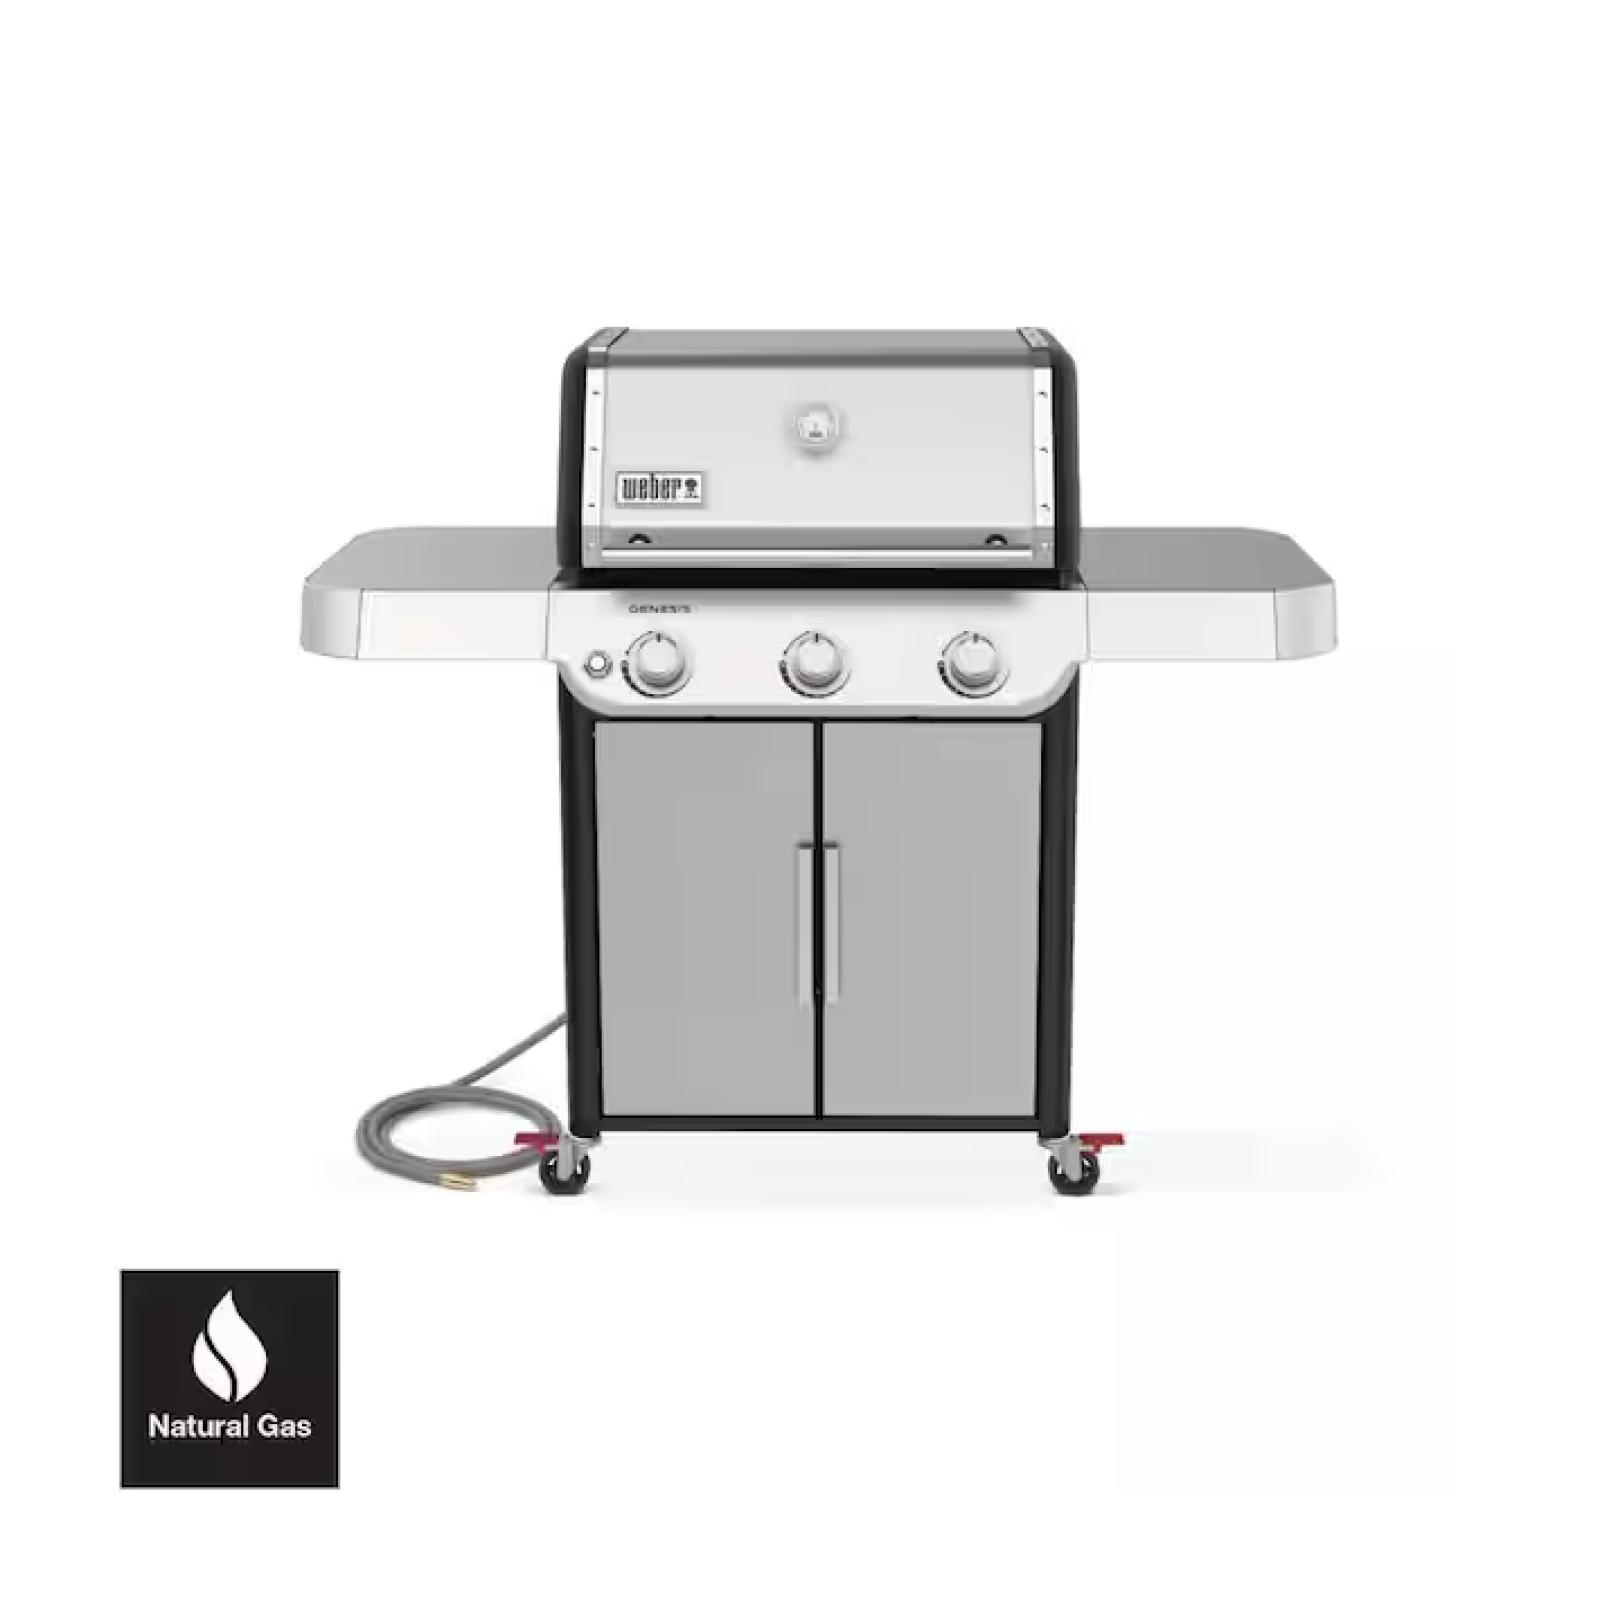 DALLAS LOCATION - Weber Genesis S-315 3-Burner Natural Gas Grill in Stainless Steel